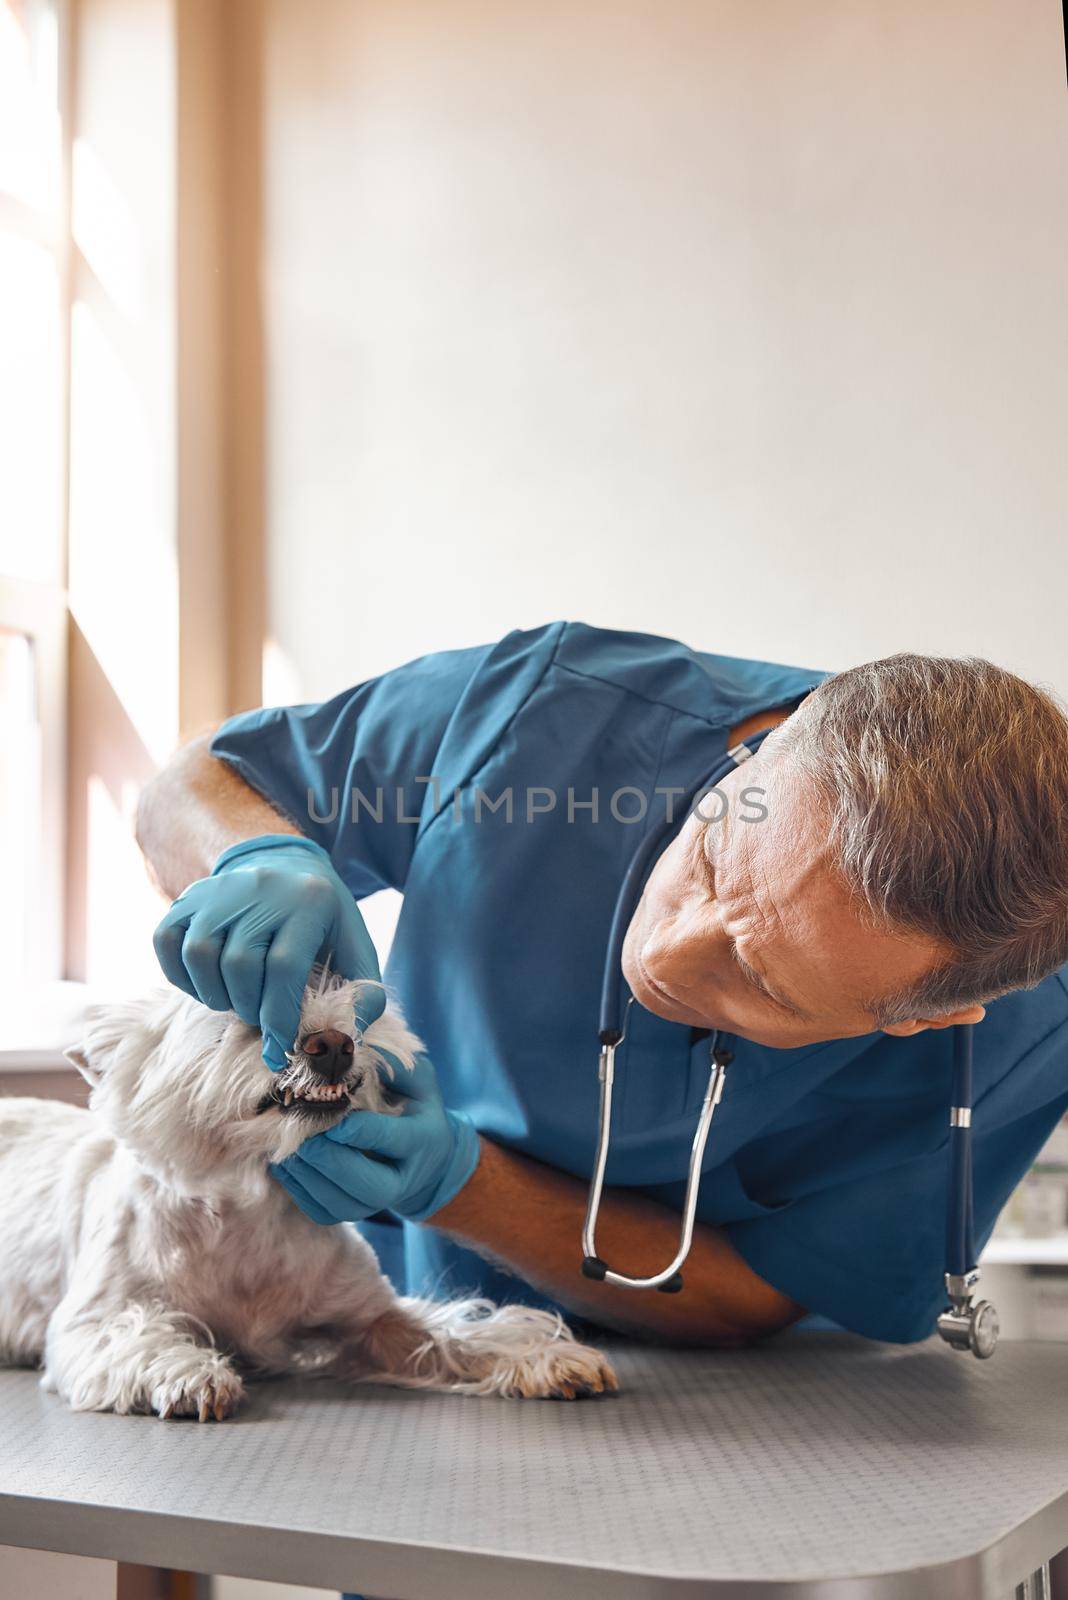 Just two minutes. Kind veterinarian in work uniform and protective gloves checking teeth of a small dog lying on the table in veterinary clinic. Pet care concept. Medicine concept. Animal hospital